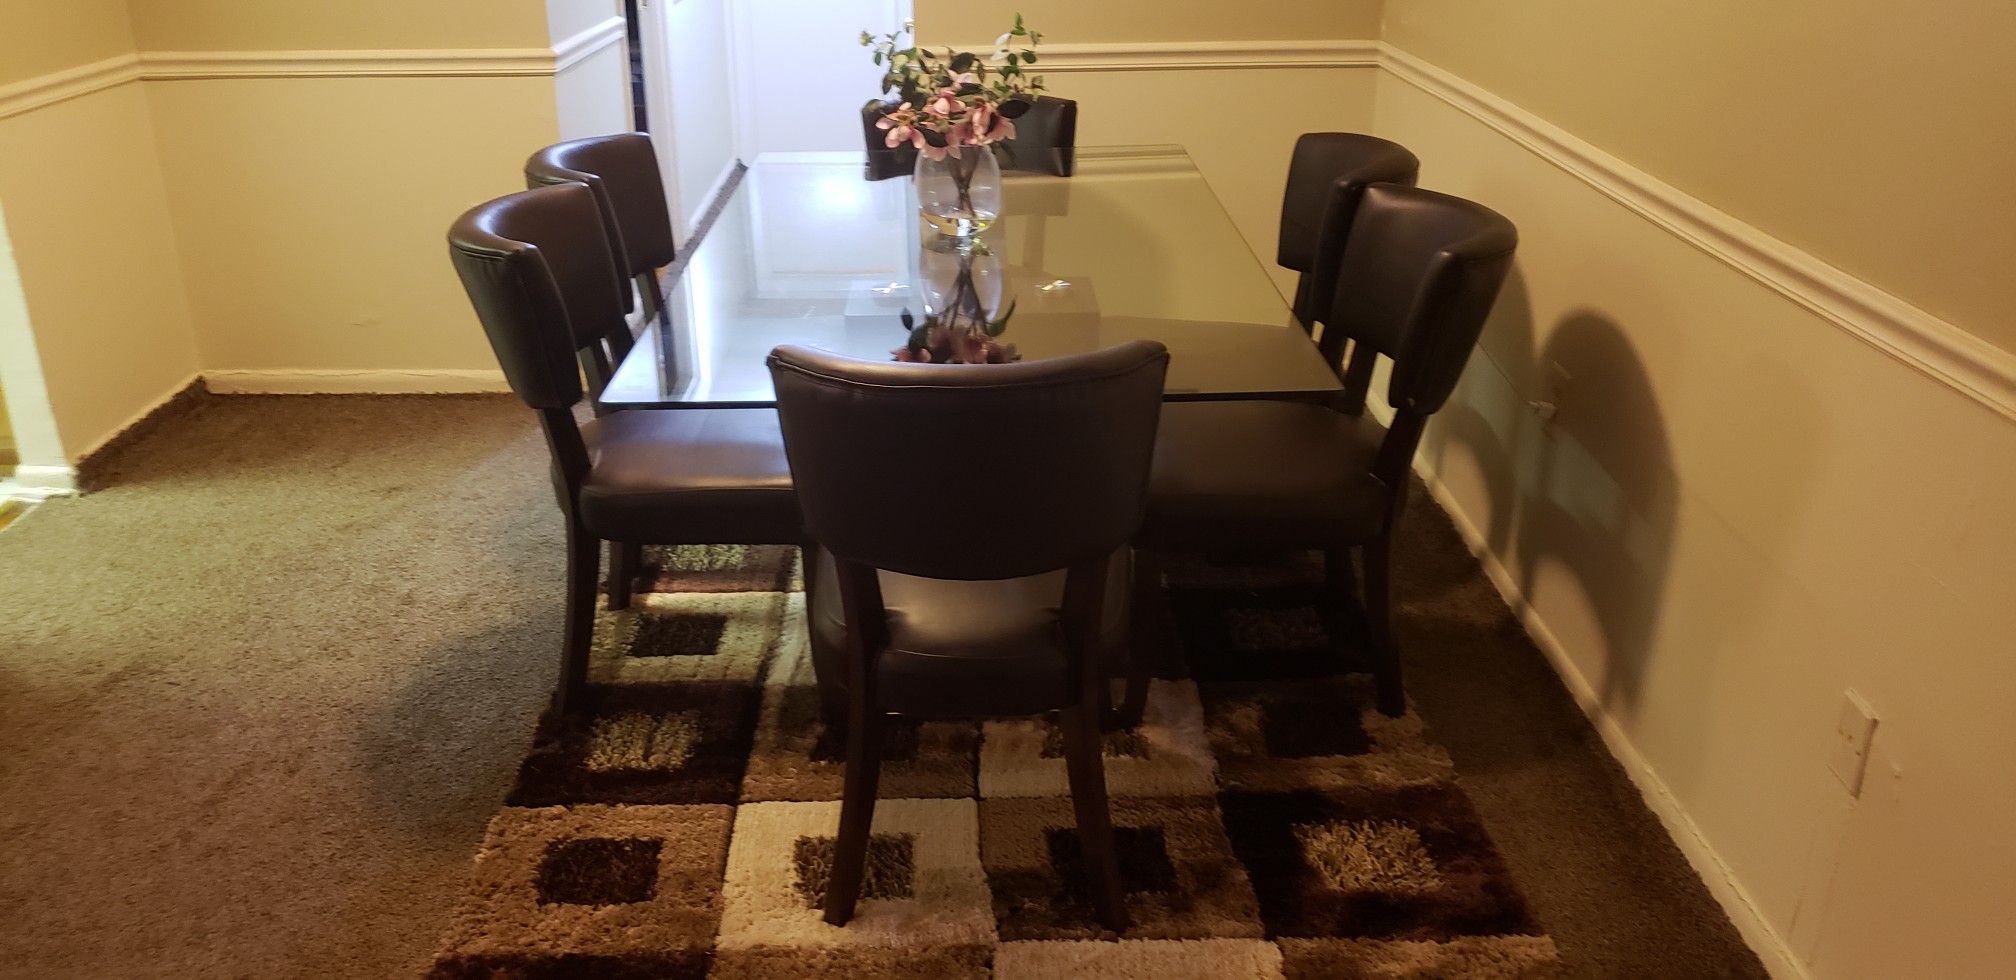 Glass dining table with 6 chairs